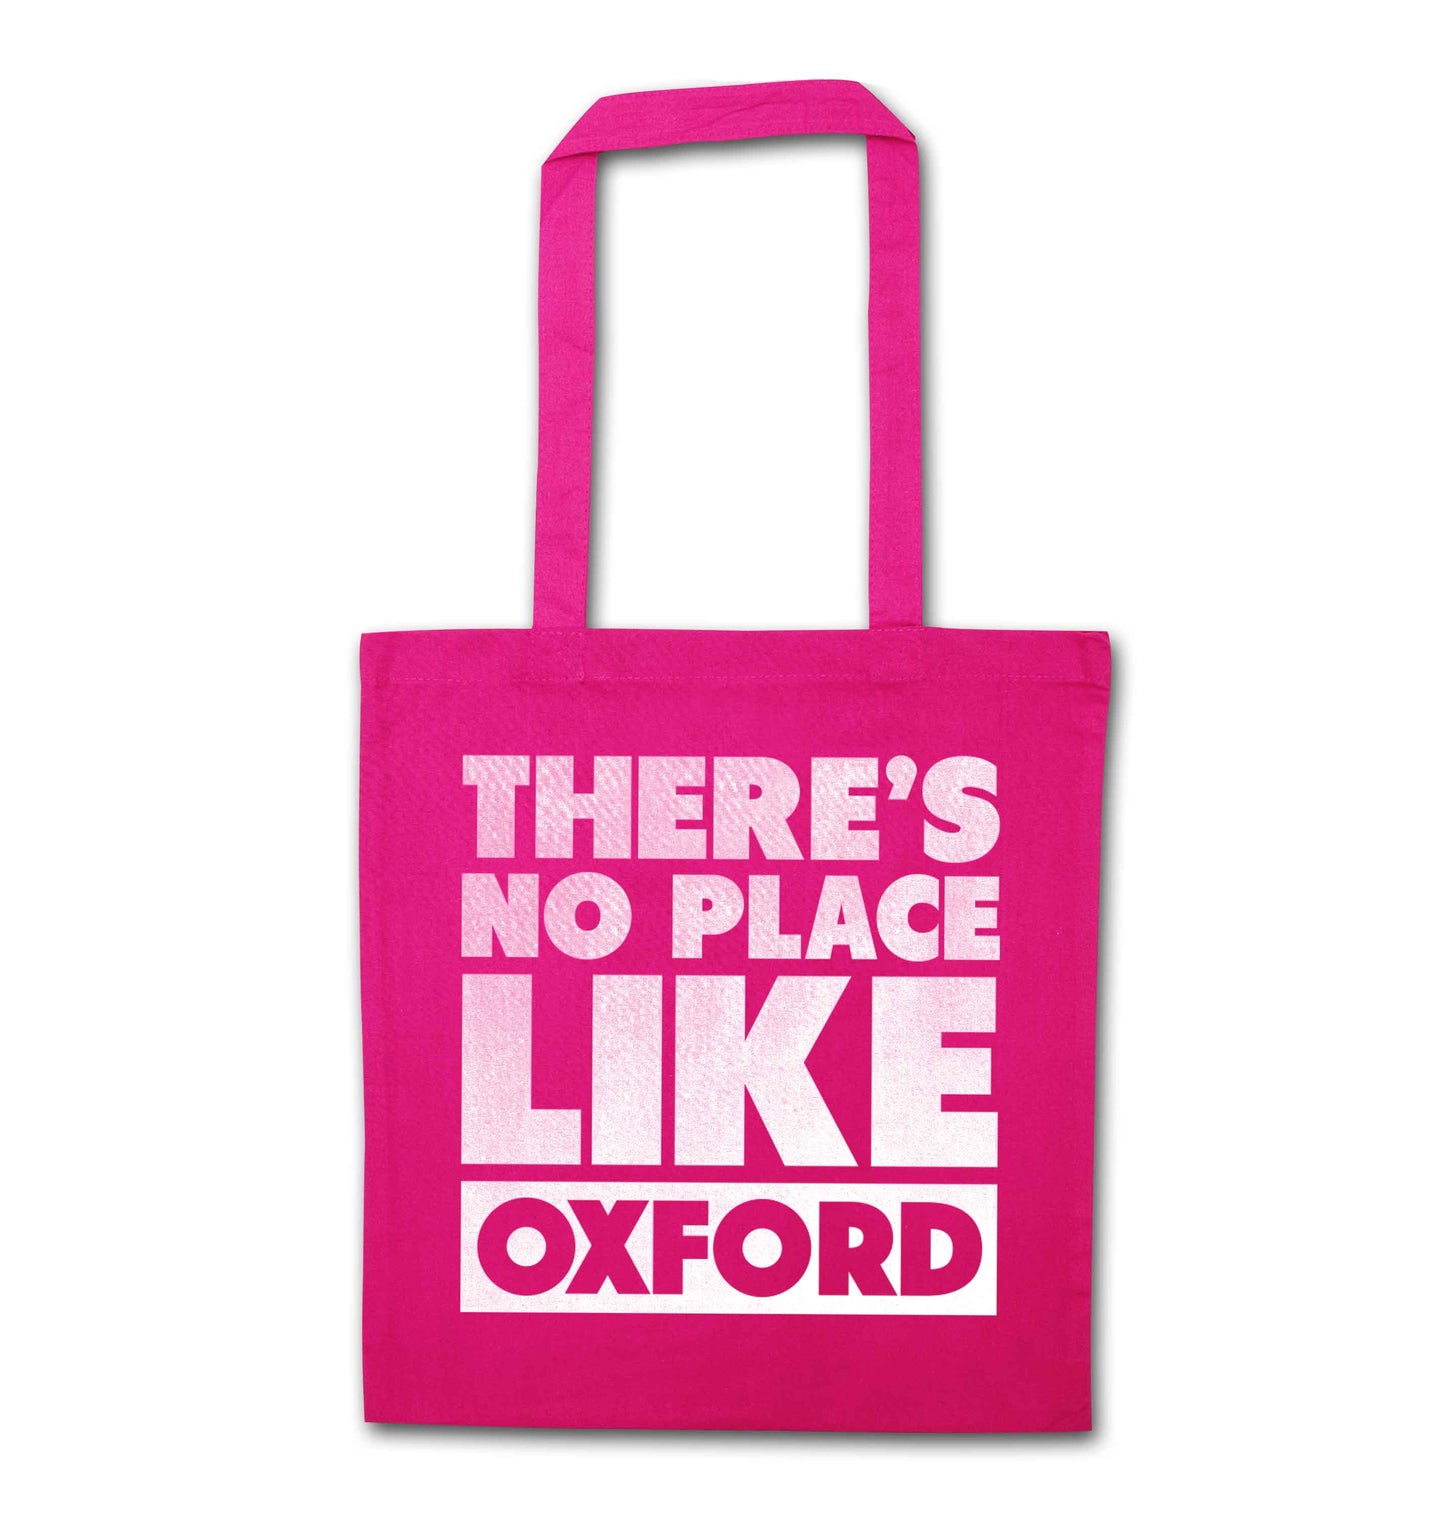 There's no place like Oxford pink tote bag